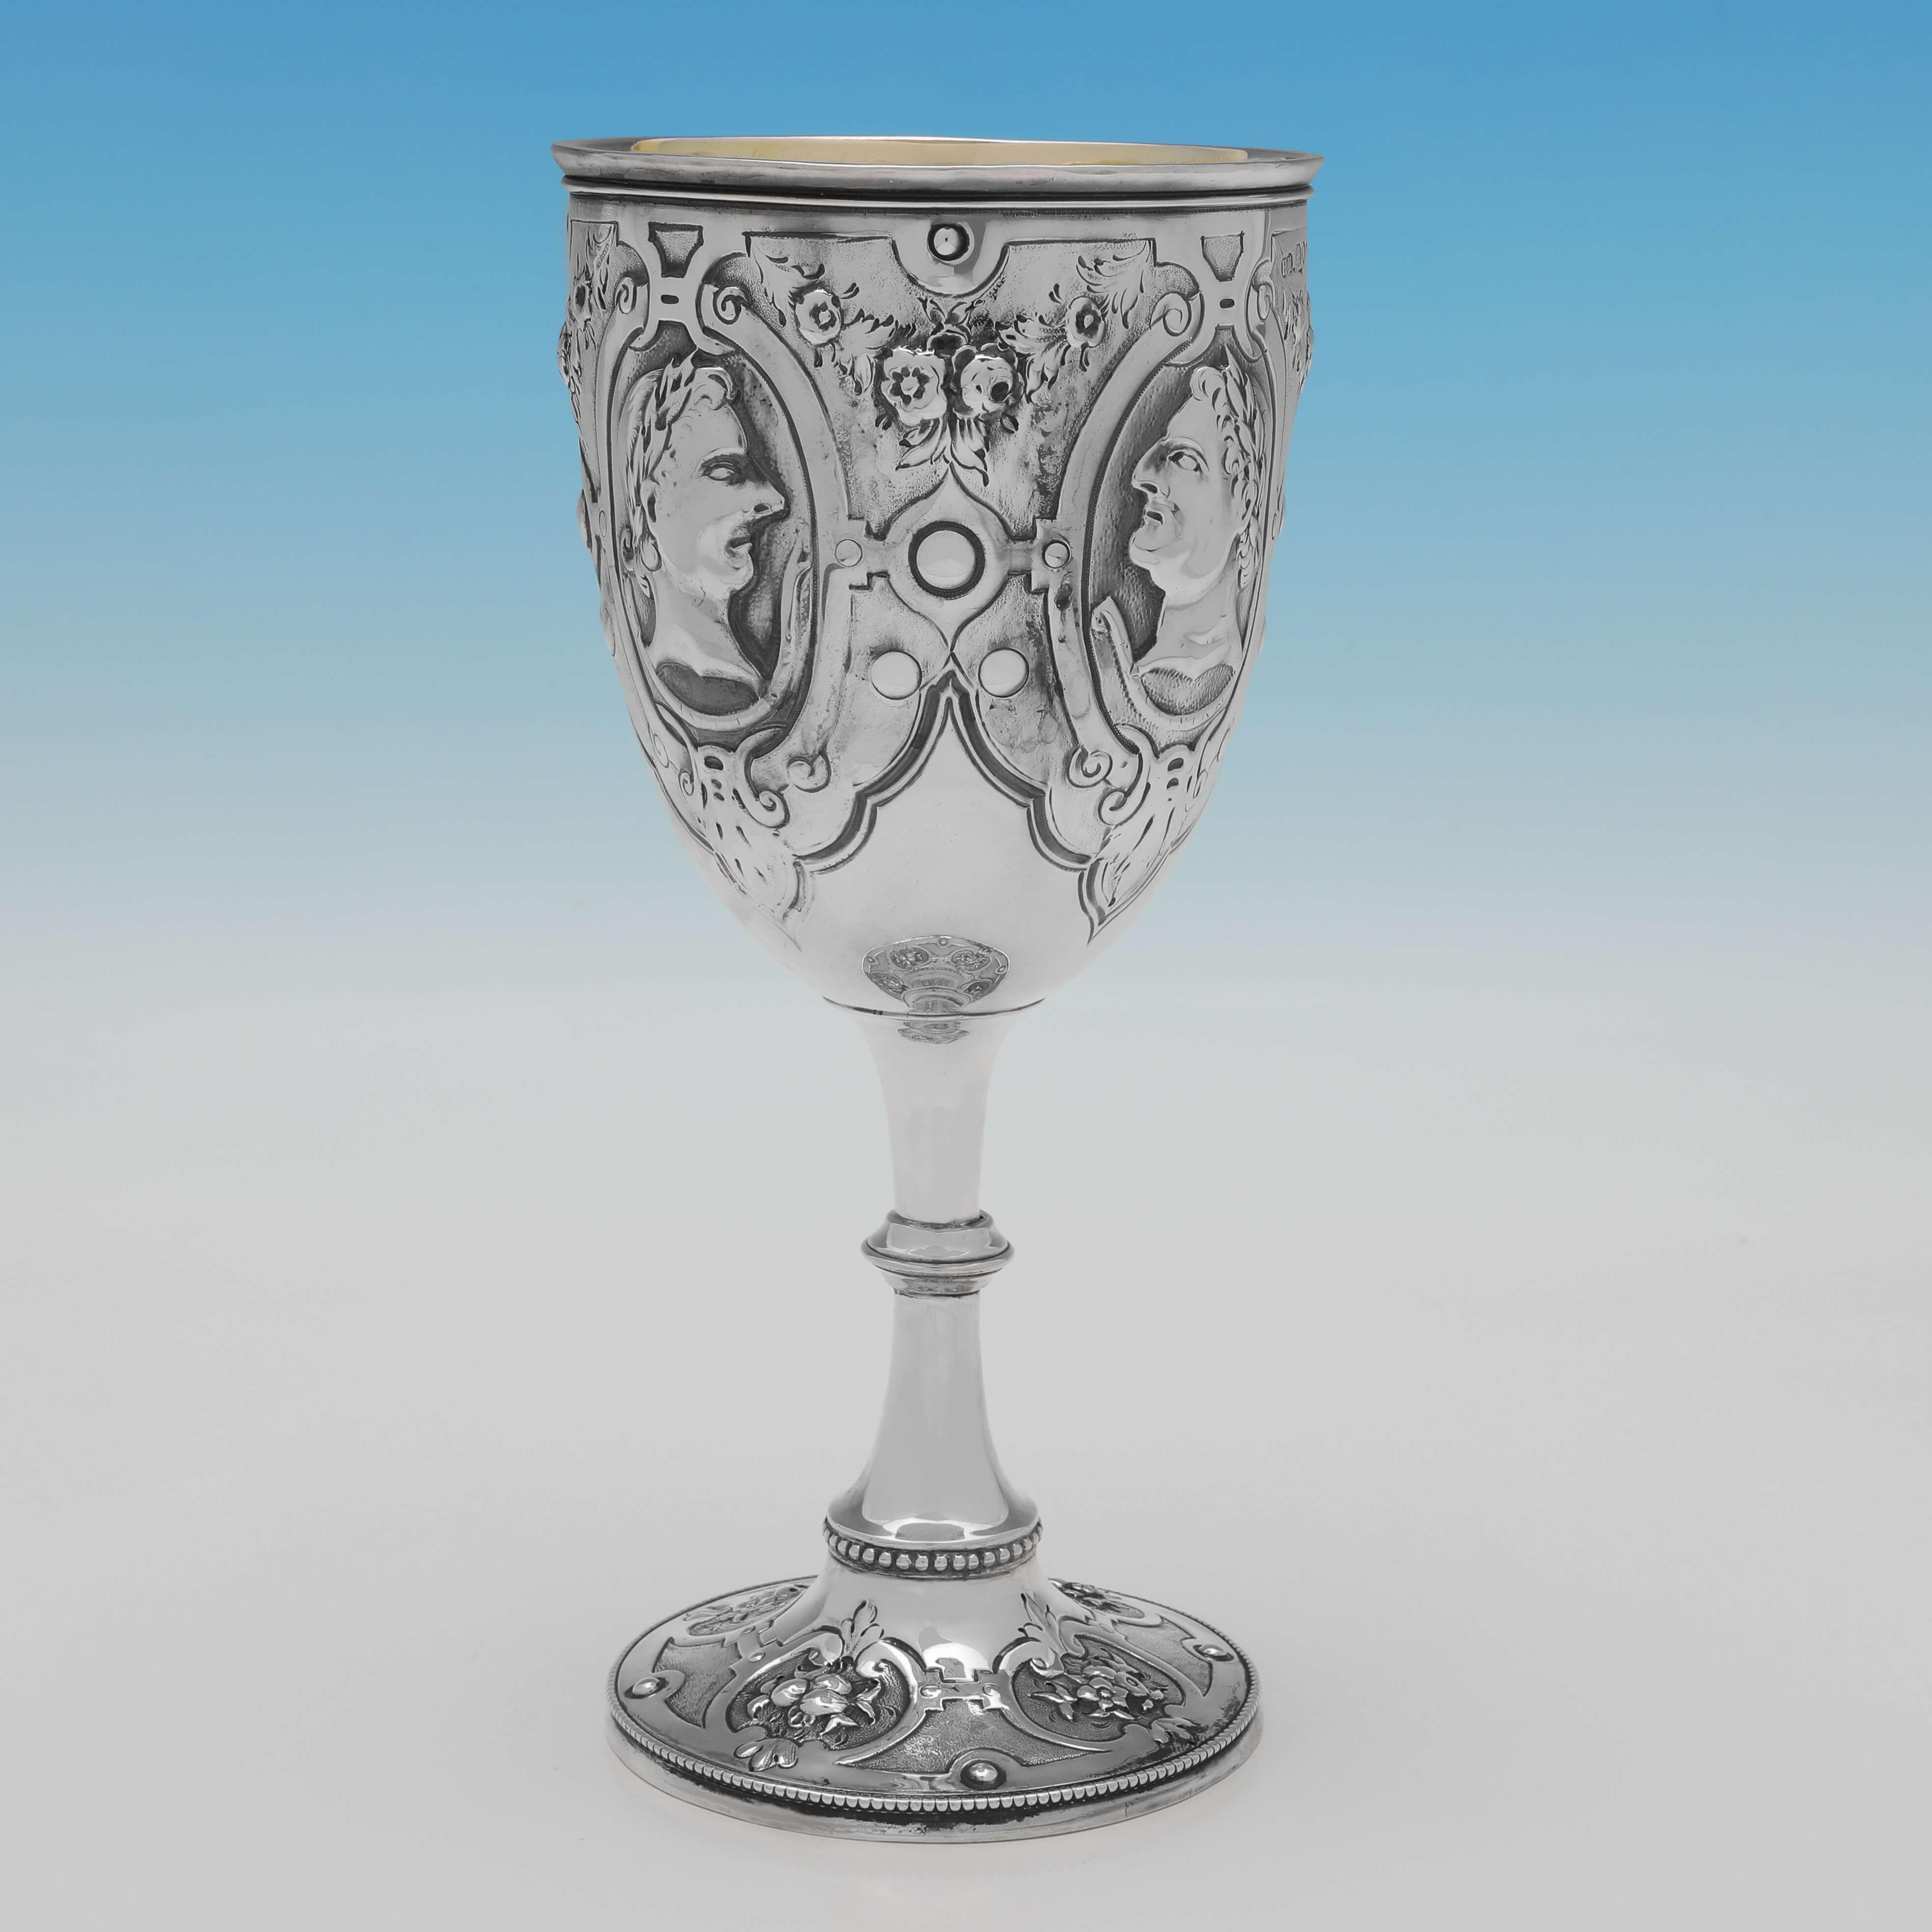 Hallmarked in London in 1874 by Henry Holland, this striking, Victorian, Antique Sterling Silver Goblet, features chased busts of Roman Emperors, a gilt interior, and bead detailing. The goblet measures 8.5